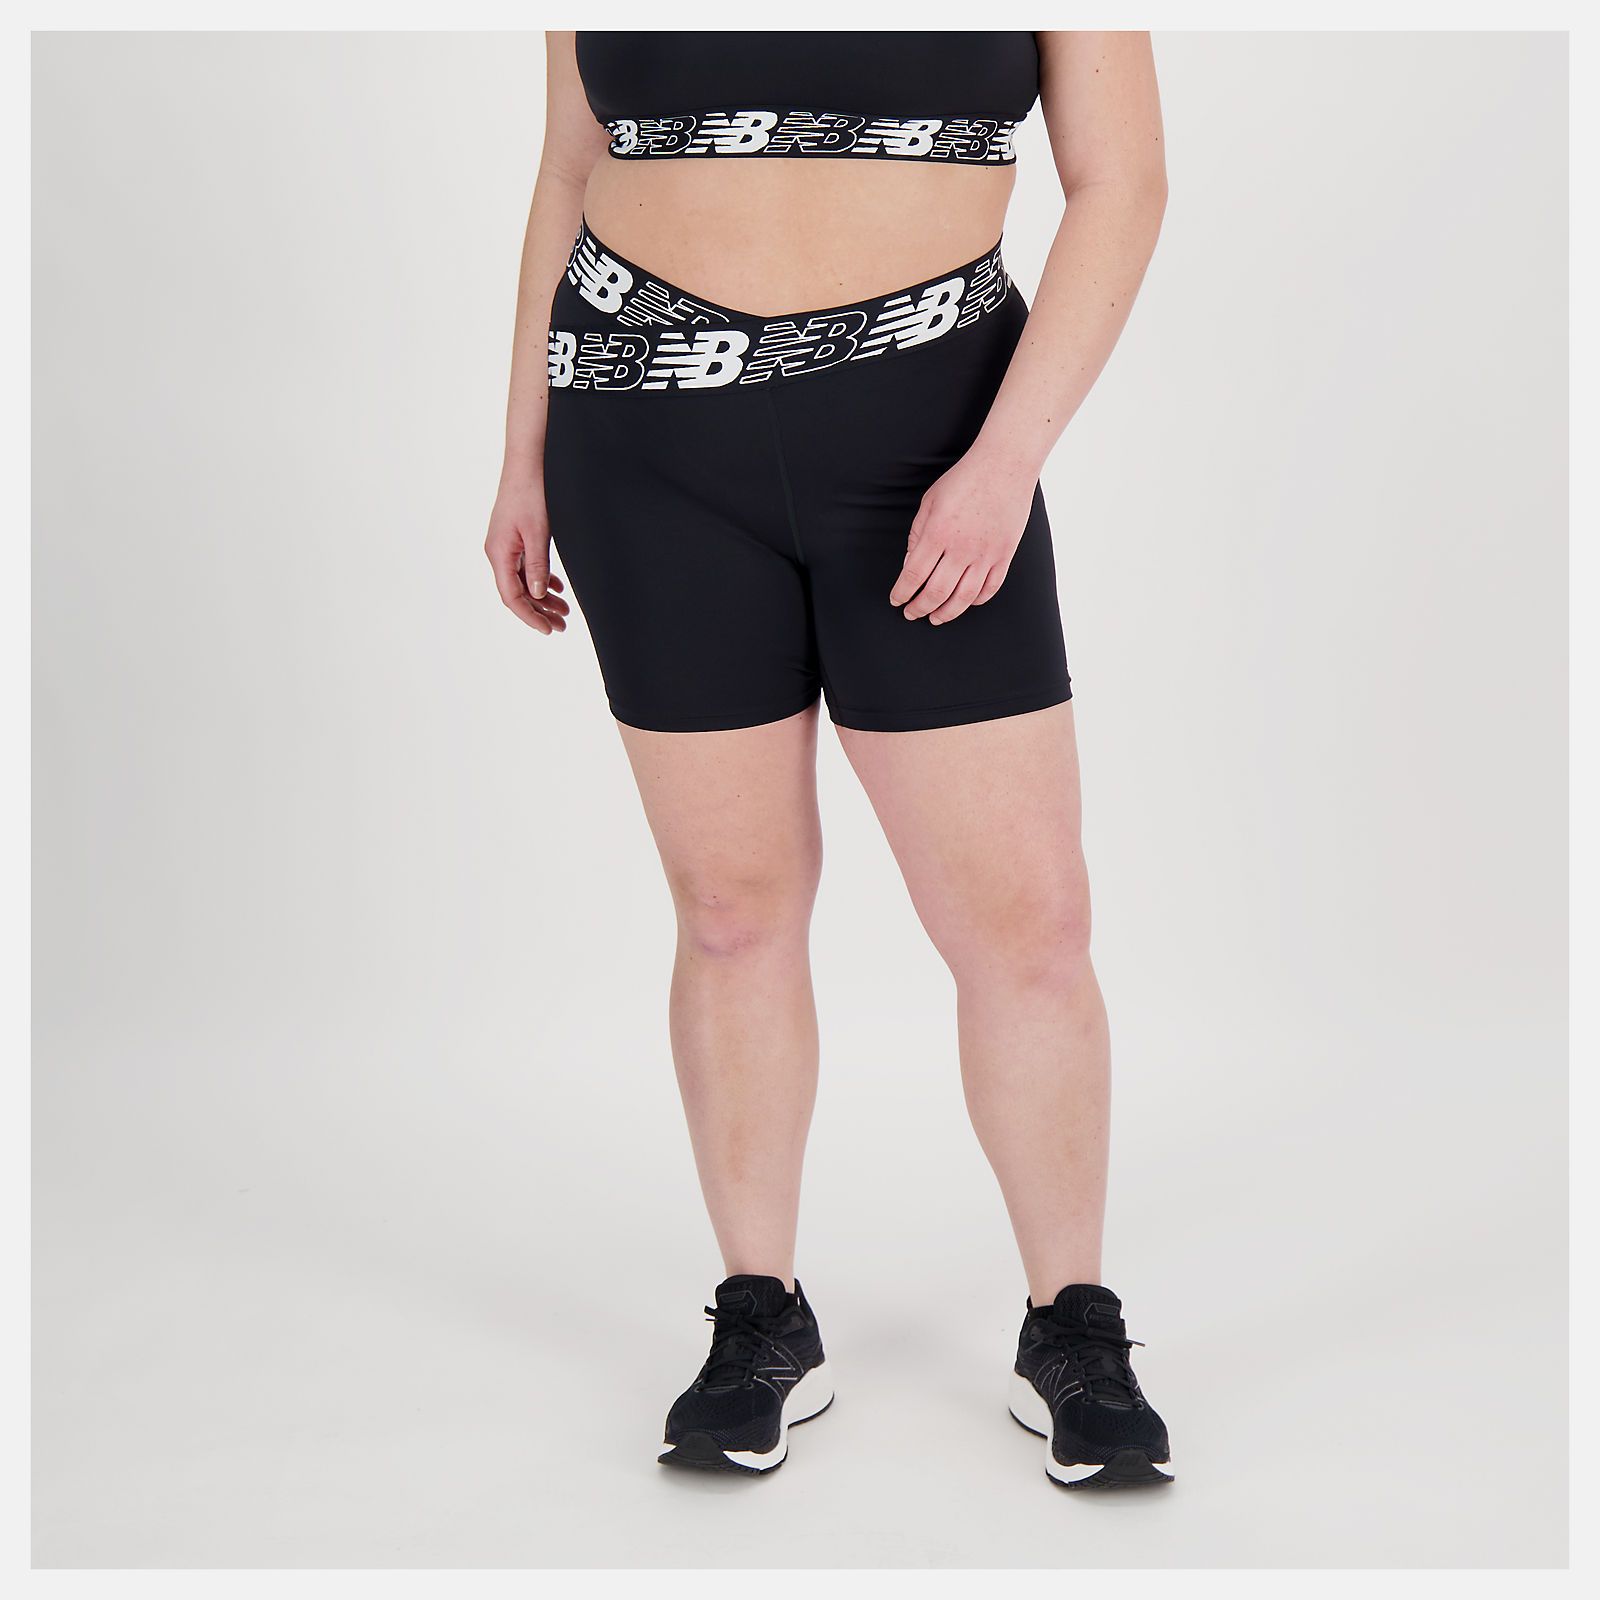 Herself repeat Surrounded Relentless Fitted Short - New Balance